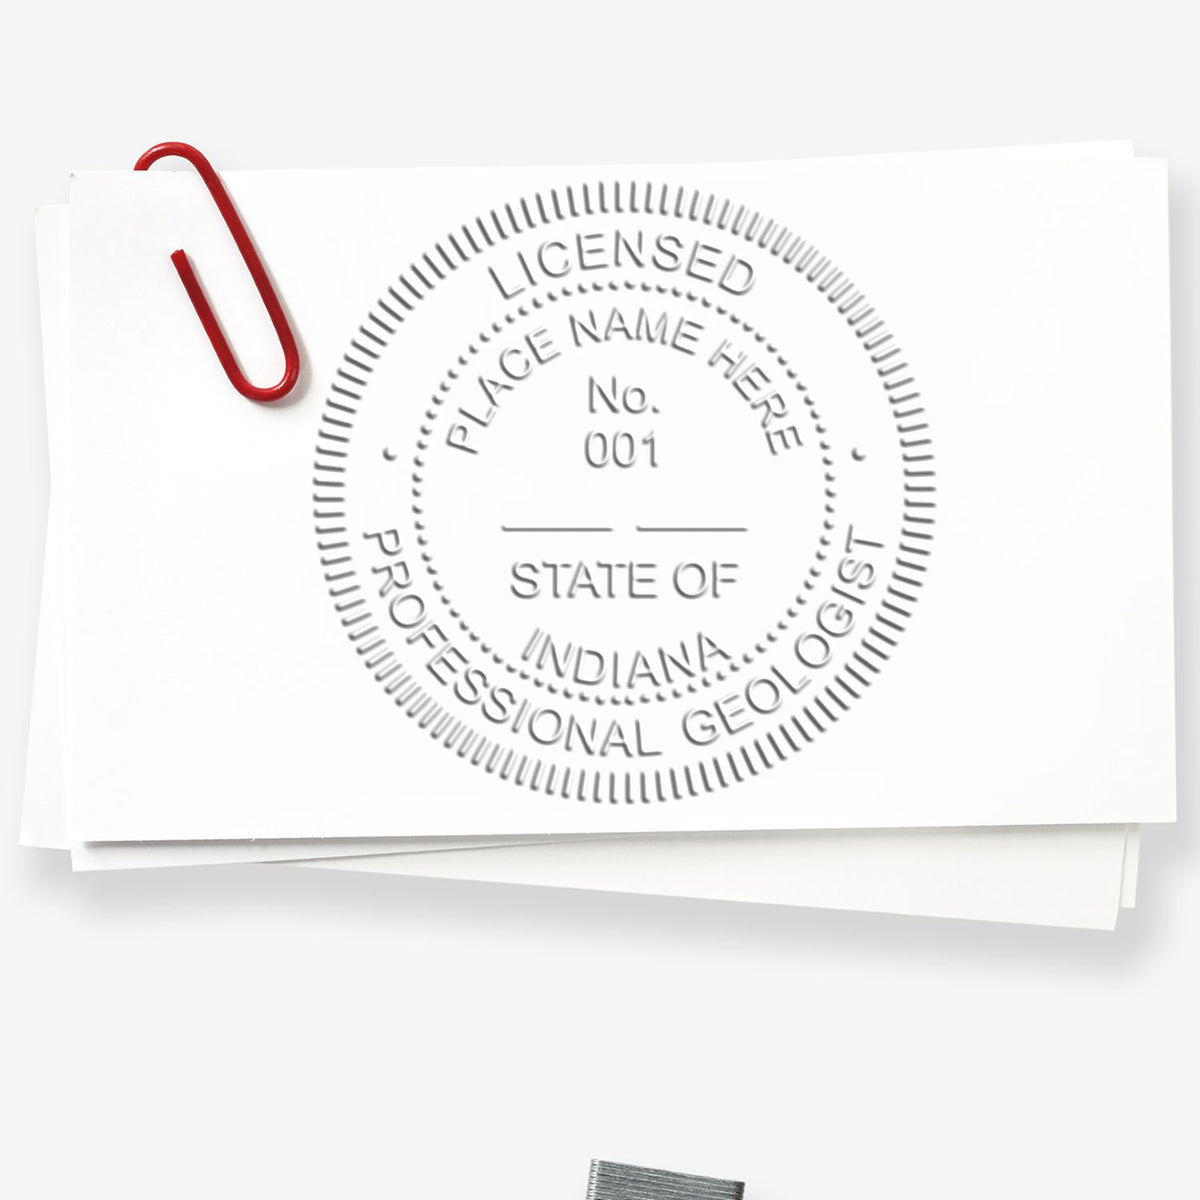 A lifestyle photo showing a stamped image of the Heavy Duty Cast Iron Indiana Geologist Seal Embosser on a piece of paper